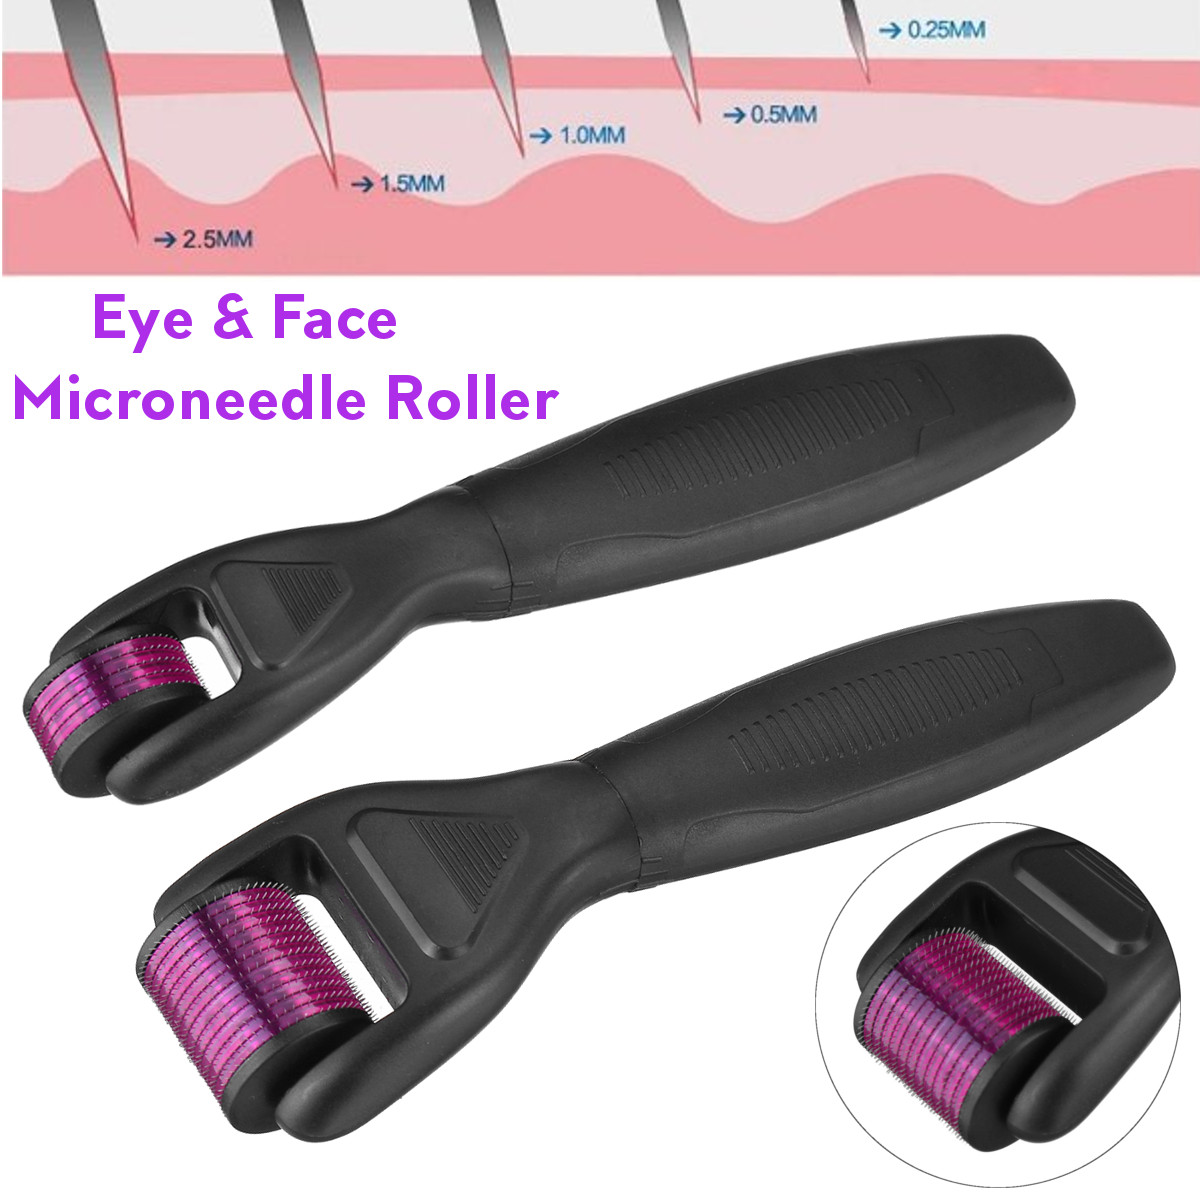 Microneedle-Micro-Needle-Roller-Kit-Therapy-Skin-Care-05-20mm-Anti-aging-Acne-1820421-5